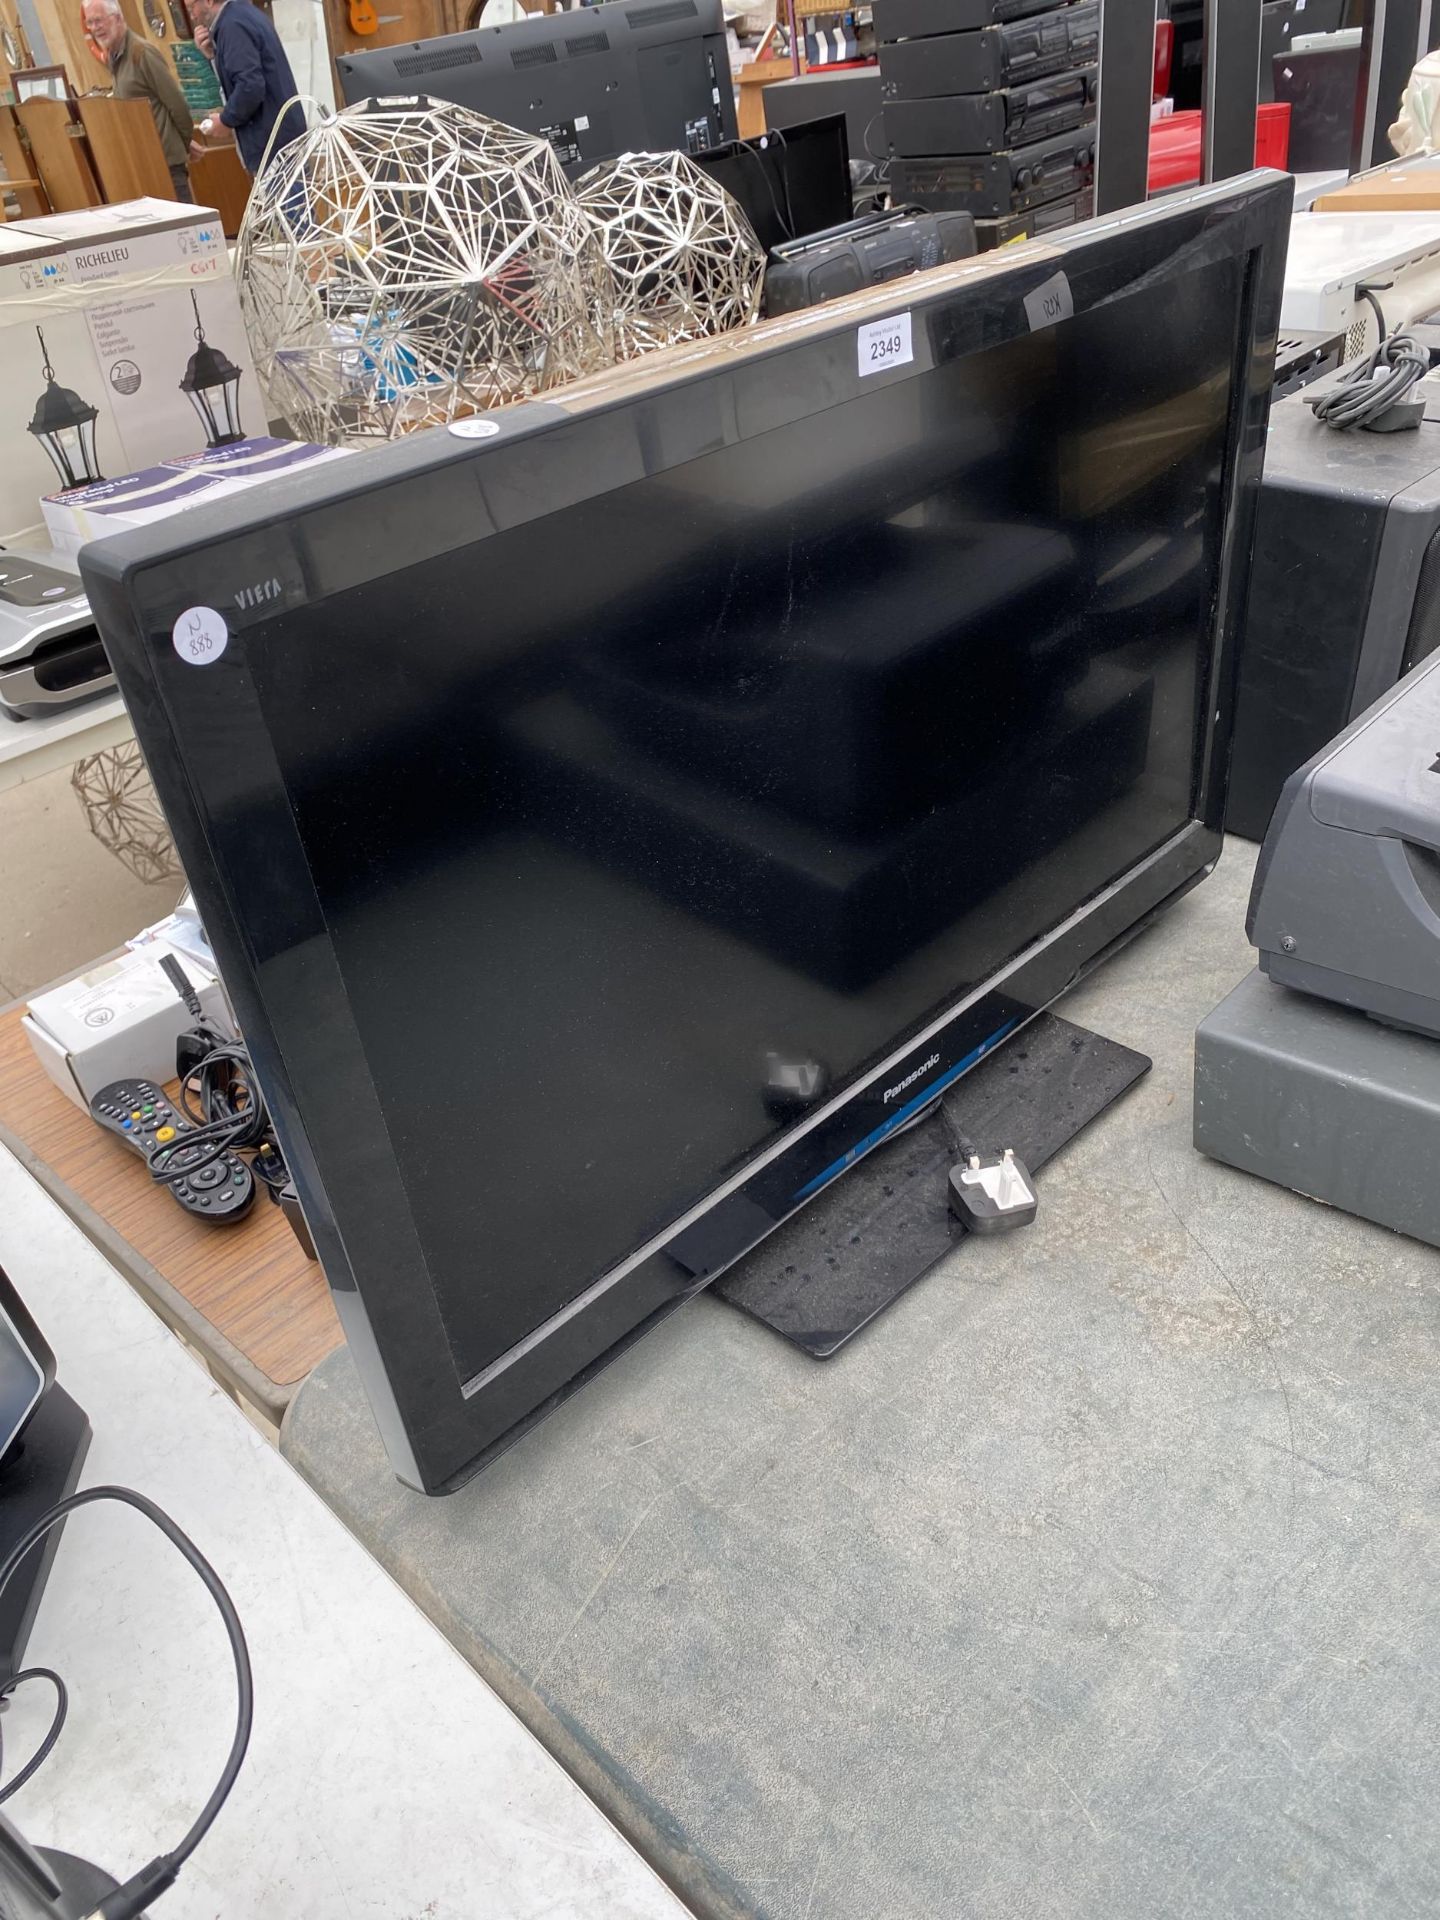 A PANSONIC 32" TELEVISION WITH REMOTE CONTROL AND USER MANUAL